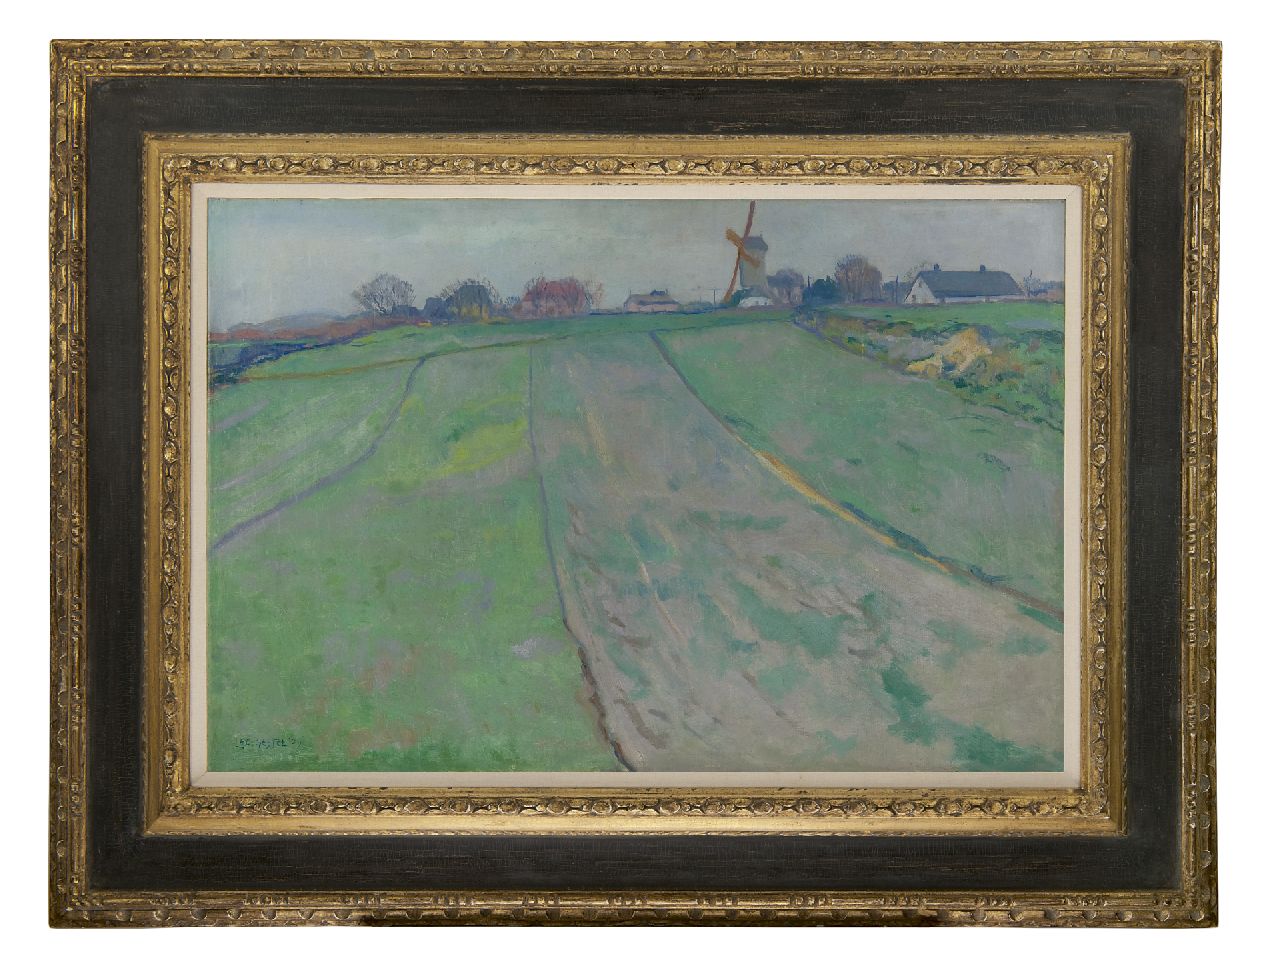 Gestel L.  | Leendert 'Leo' Gestel, A sad day, oil on canvas 48.7 x 72.5 cm, signed l.l. and dated '09